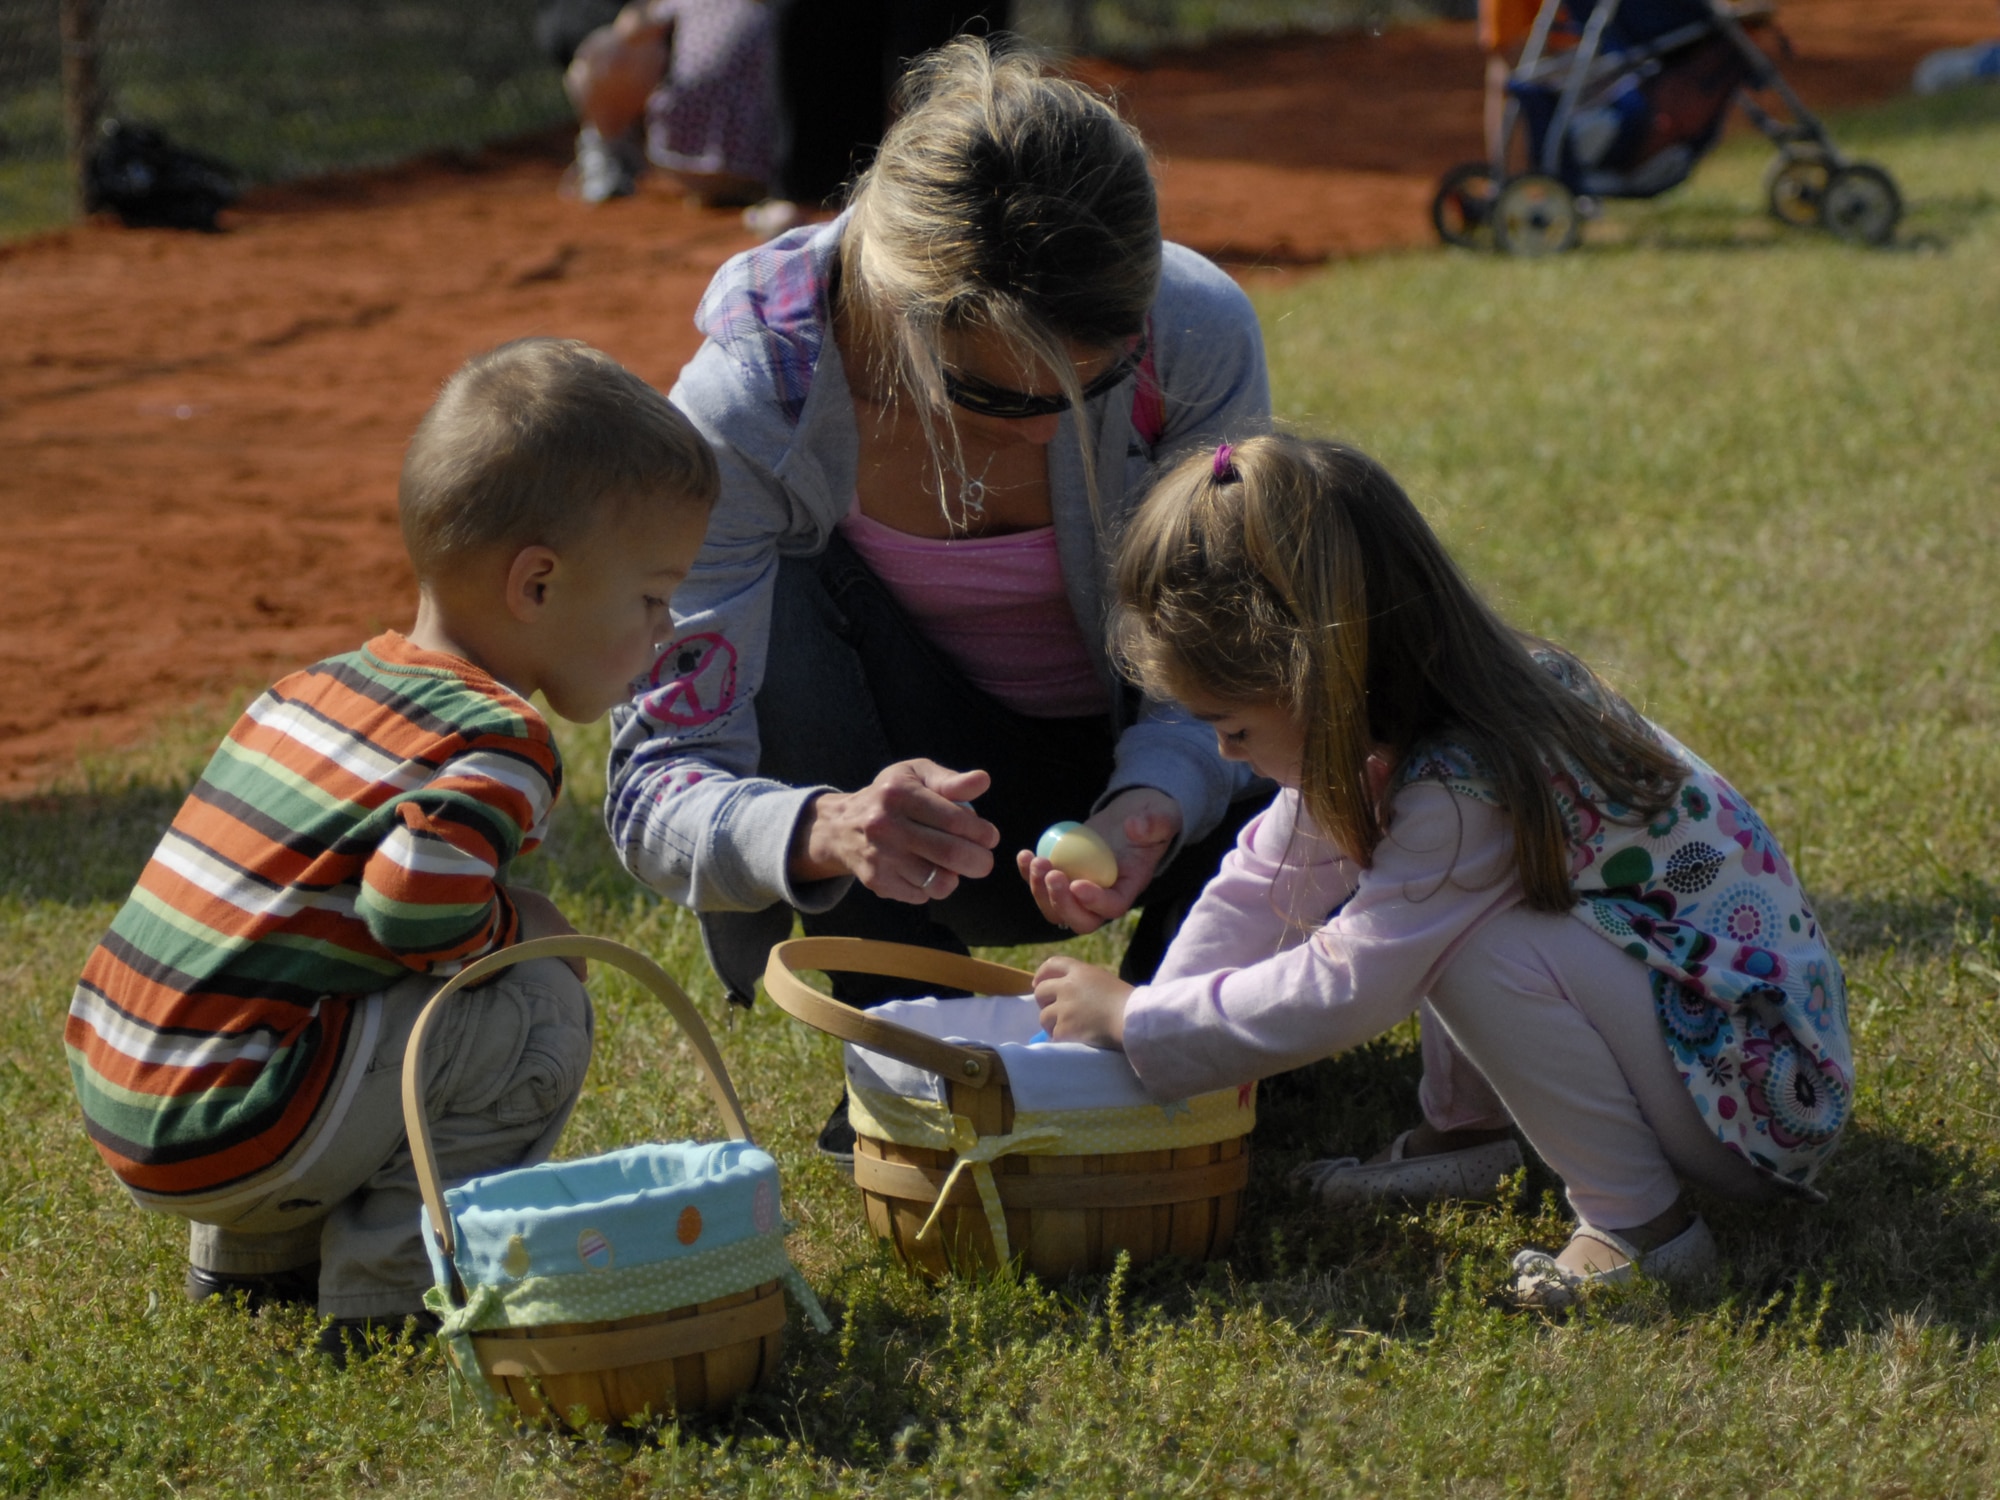 Christina Hoffman, center, helps sort through her daughter Aleyah's, 3, basket as her son Tristan, 2, looks on at the tenth annual Family Fest and Egg Hunt at the Hurlburt Field Community Park April 3. The event was coordinated by the 1st Special Operations Force Support Squadron and sponsoring agencies for family entertainment during the holiday weekend. (U.S. Air Force photo by Airman 1st Class Joe McFadden)